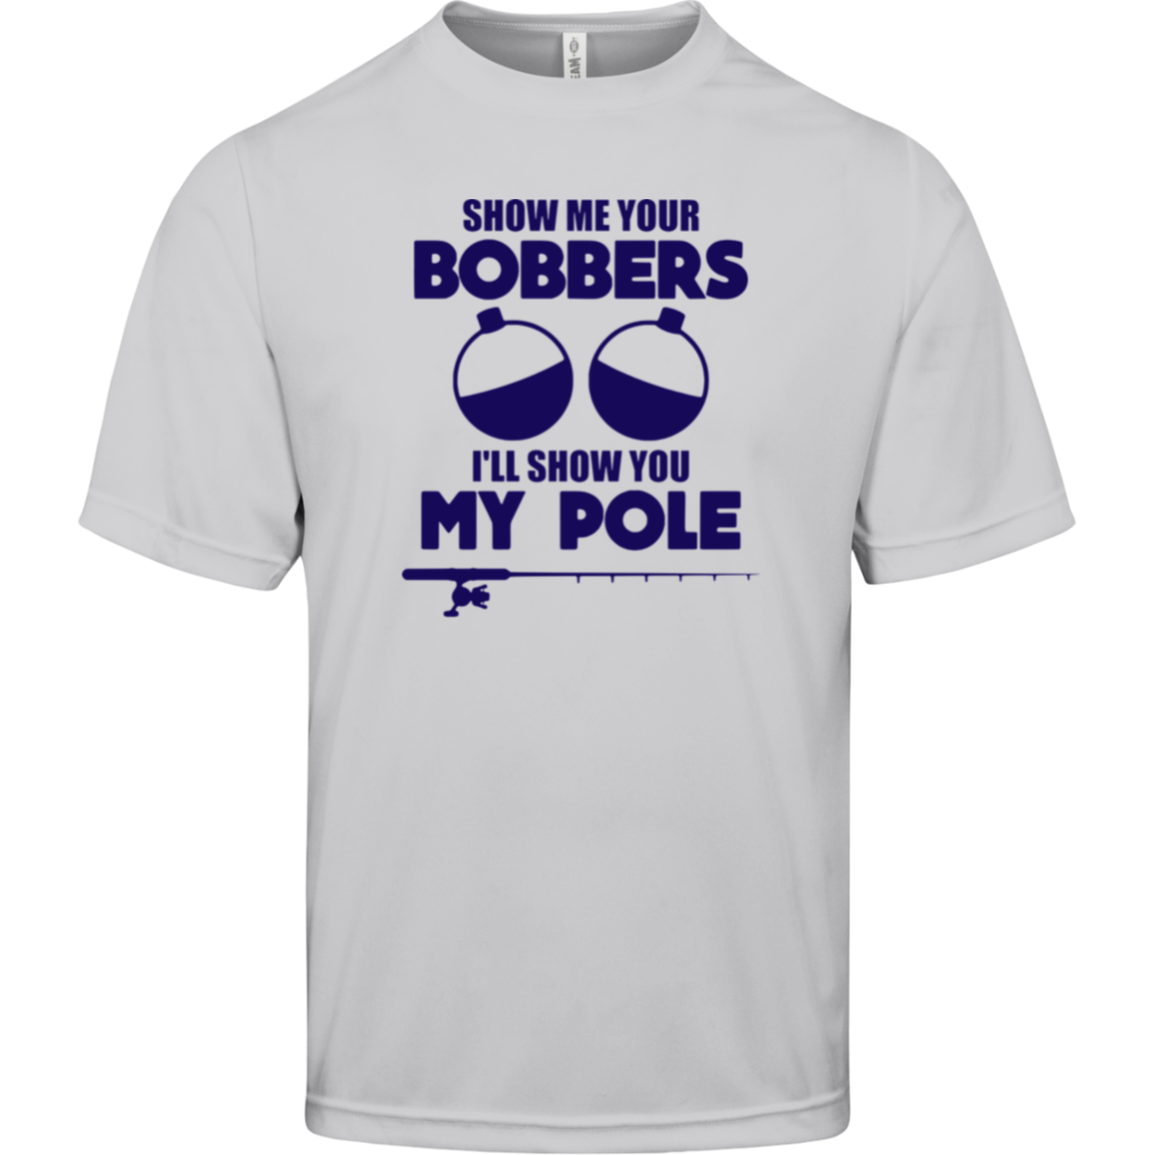 ***2 SIDED***  HRCL FL - Navy Show Me Your Bobbers I'll Show You My Pole - - 2 Sided - UV 40+ Protection TT11 Team 365 Mens Zone Tee